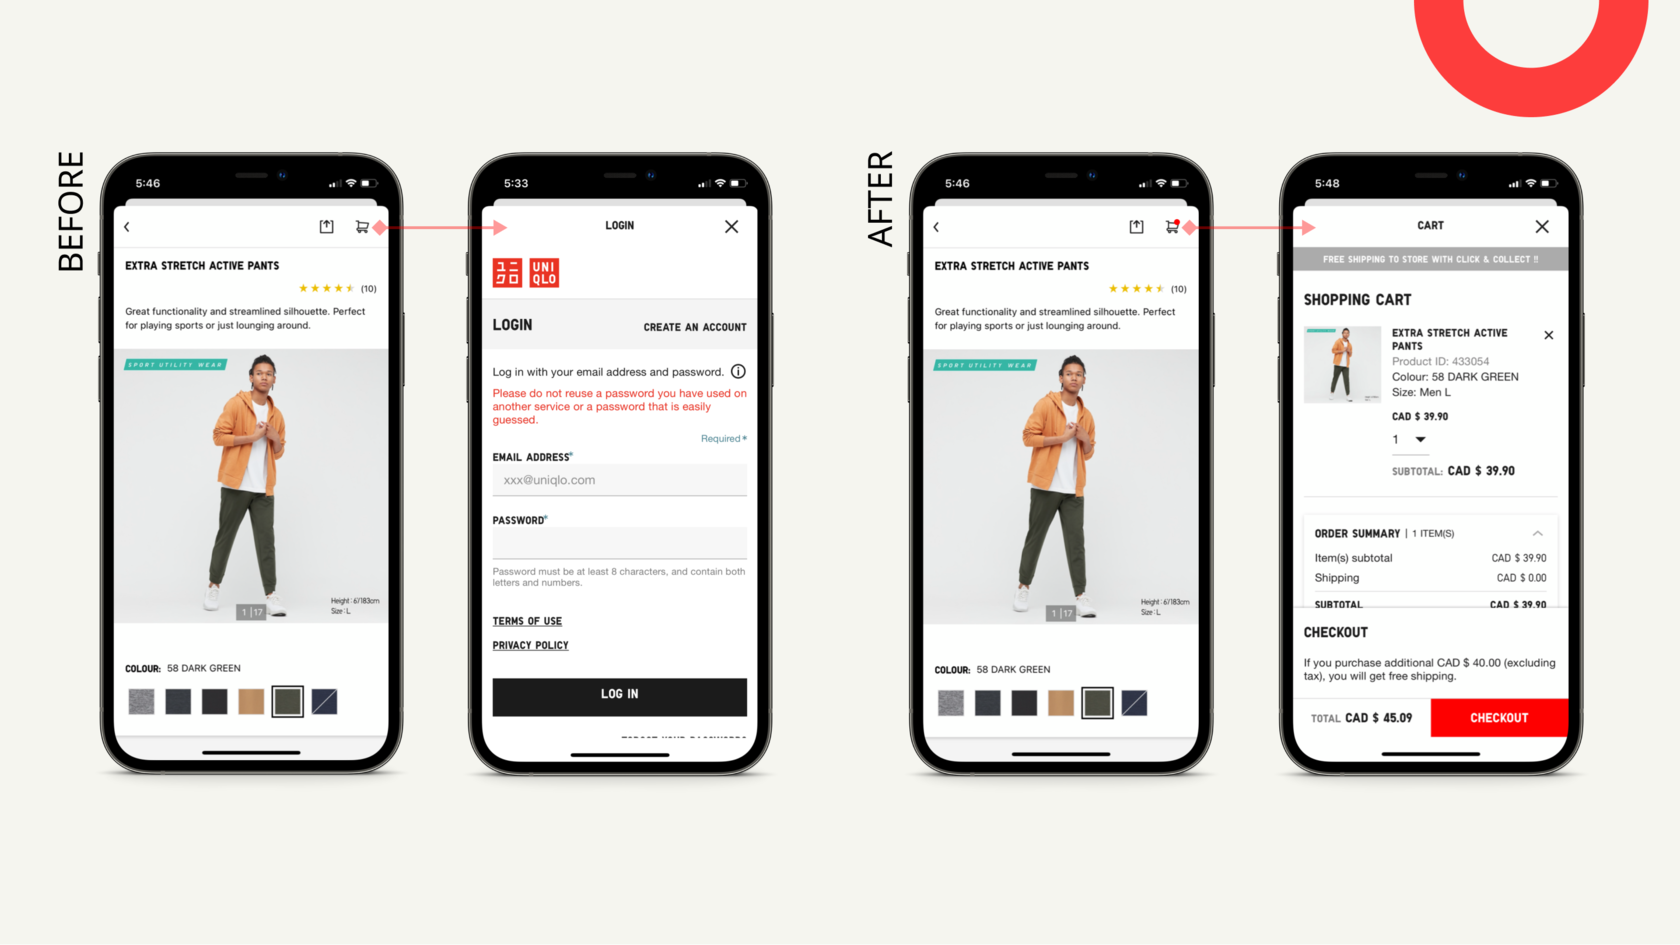 Uniqlo Canada on X: We're excited to announce that you can now shop online  in Canada through the UNIQLO CA App and mobile site! Visit   on your mobile device to start